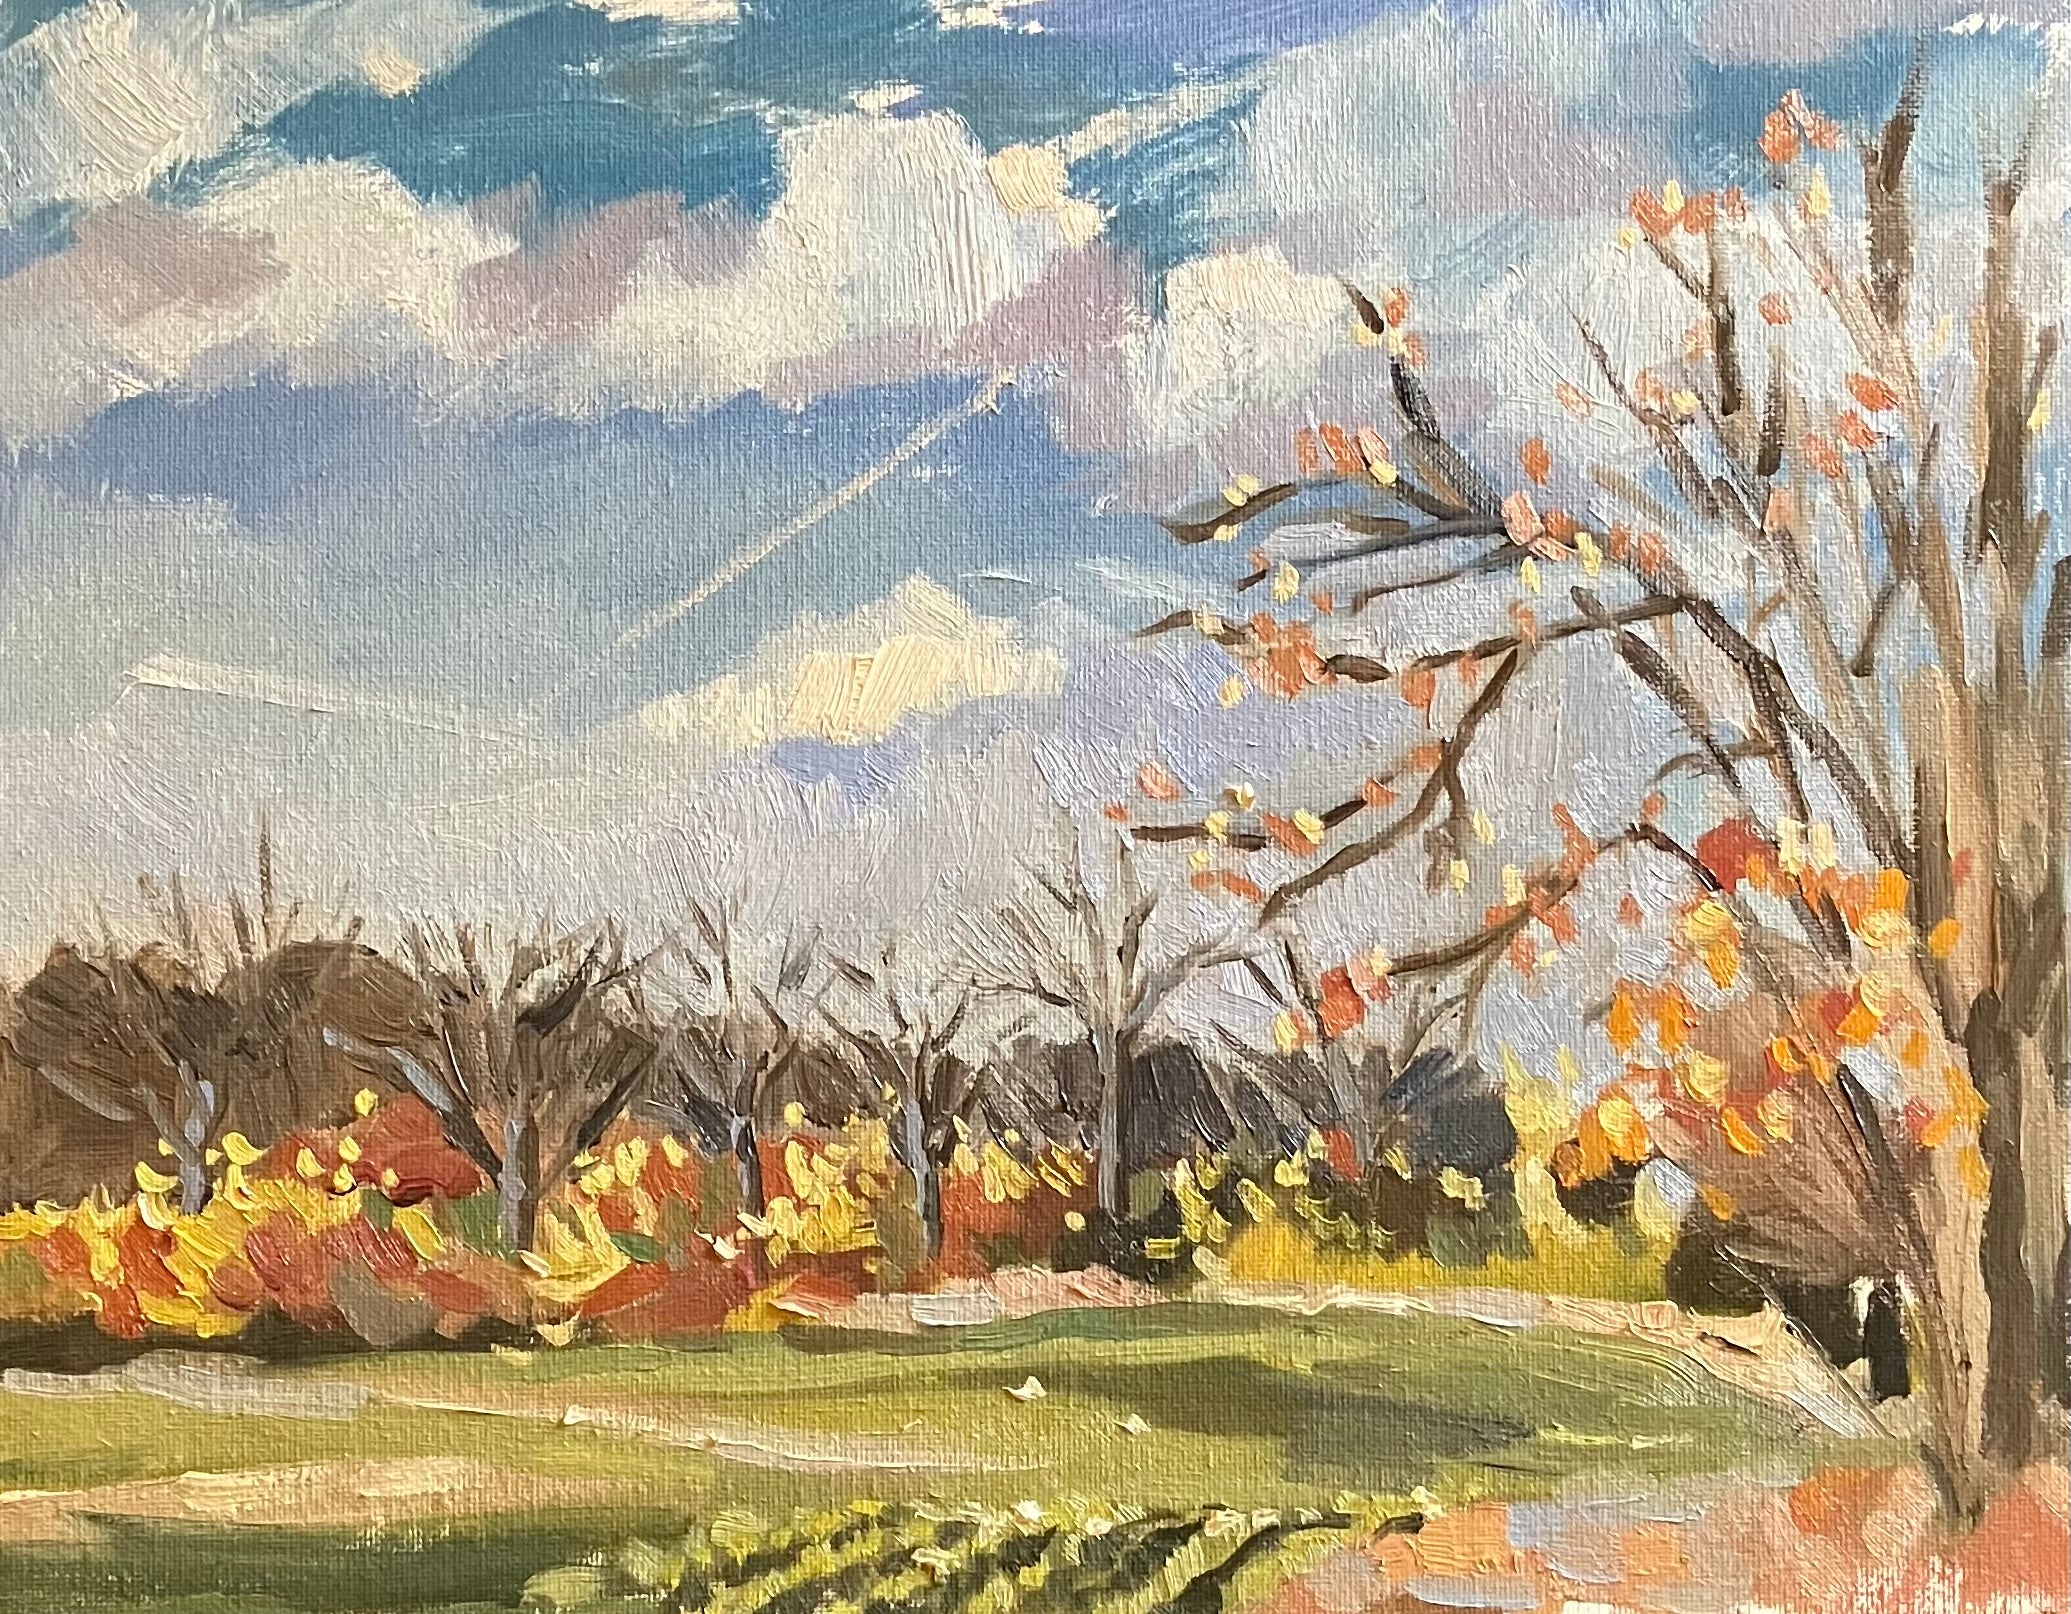 Winter Wheat, Early November Original Oil Painting